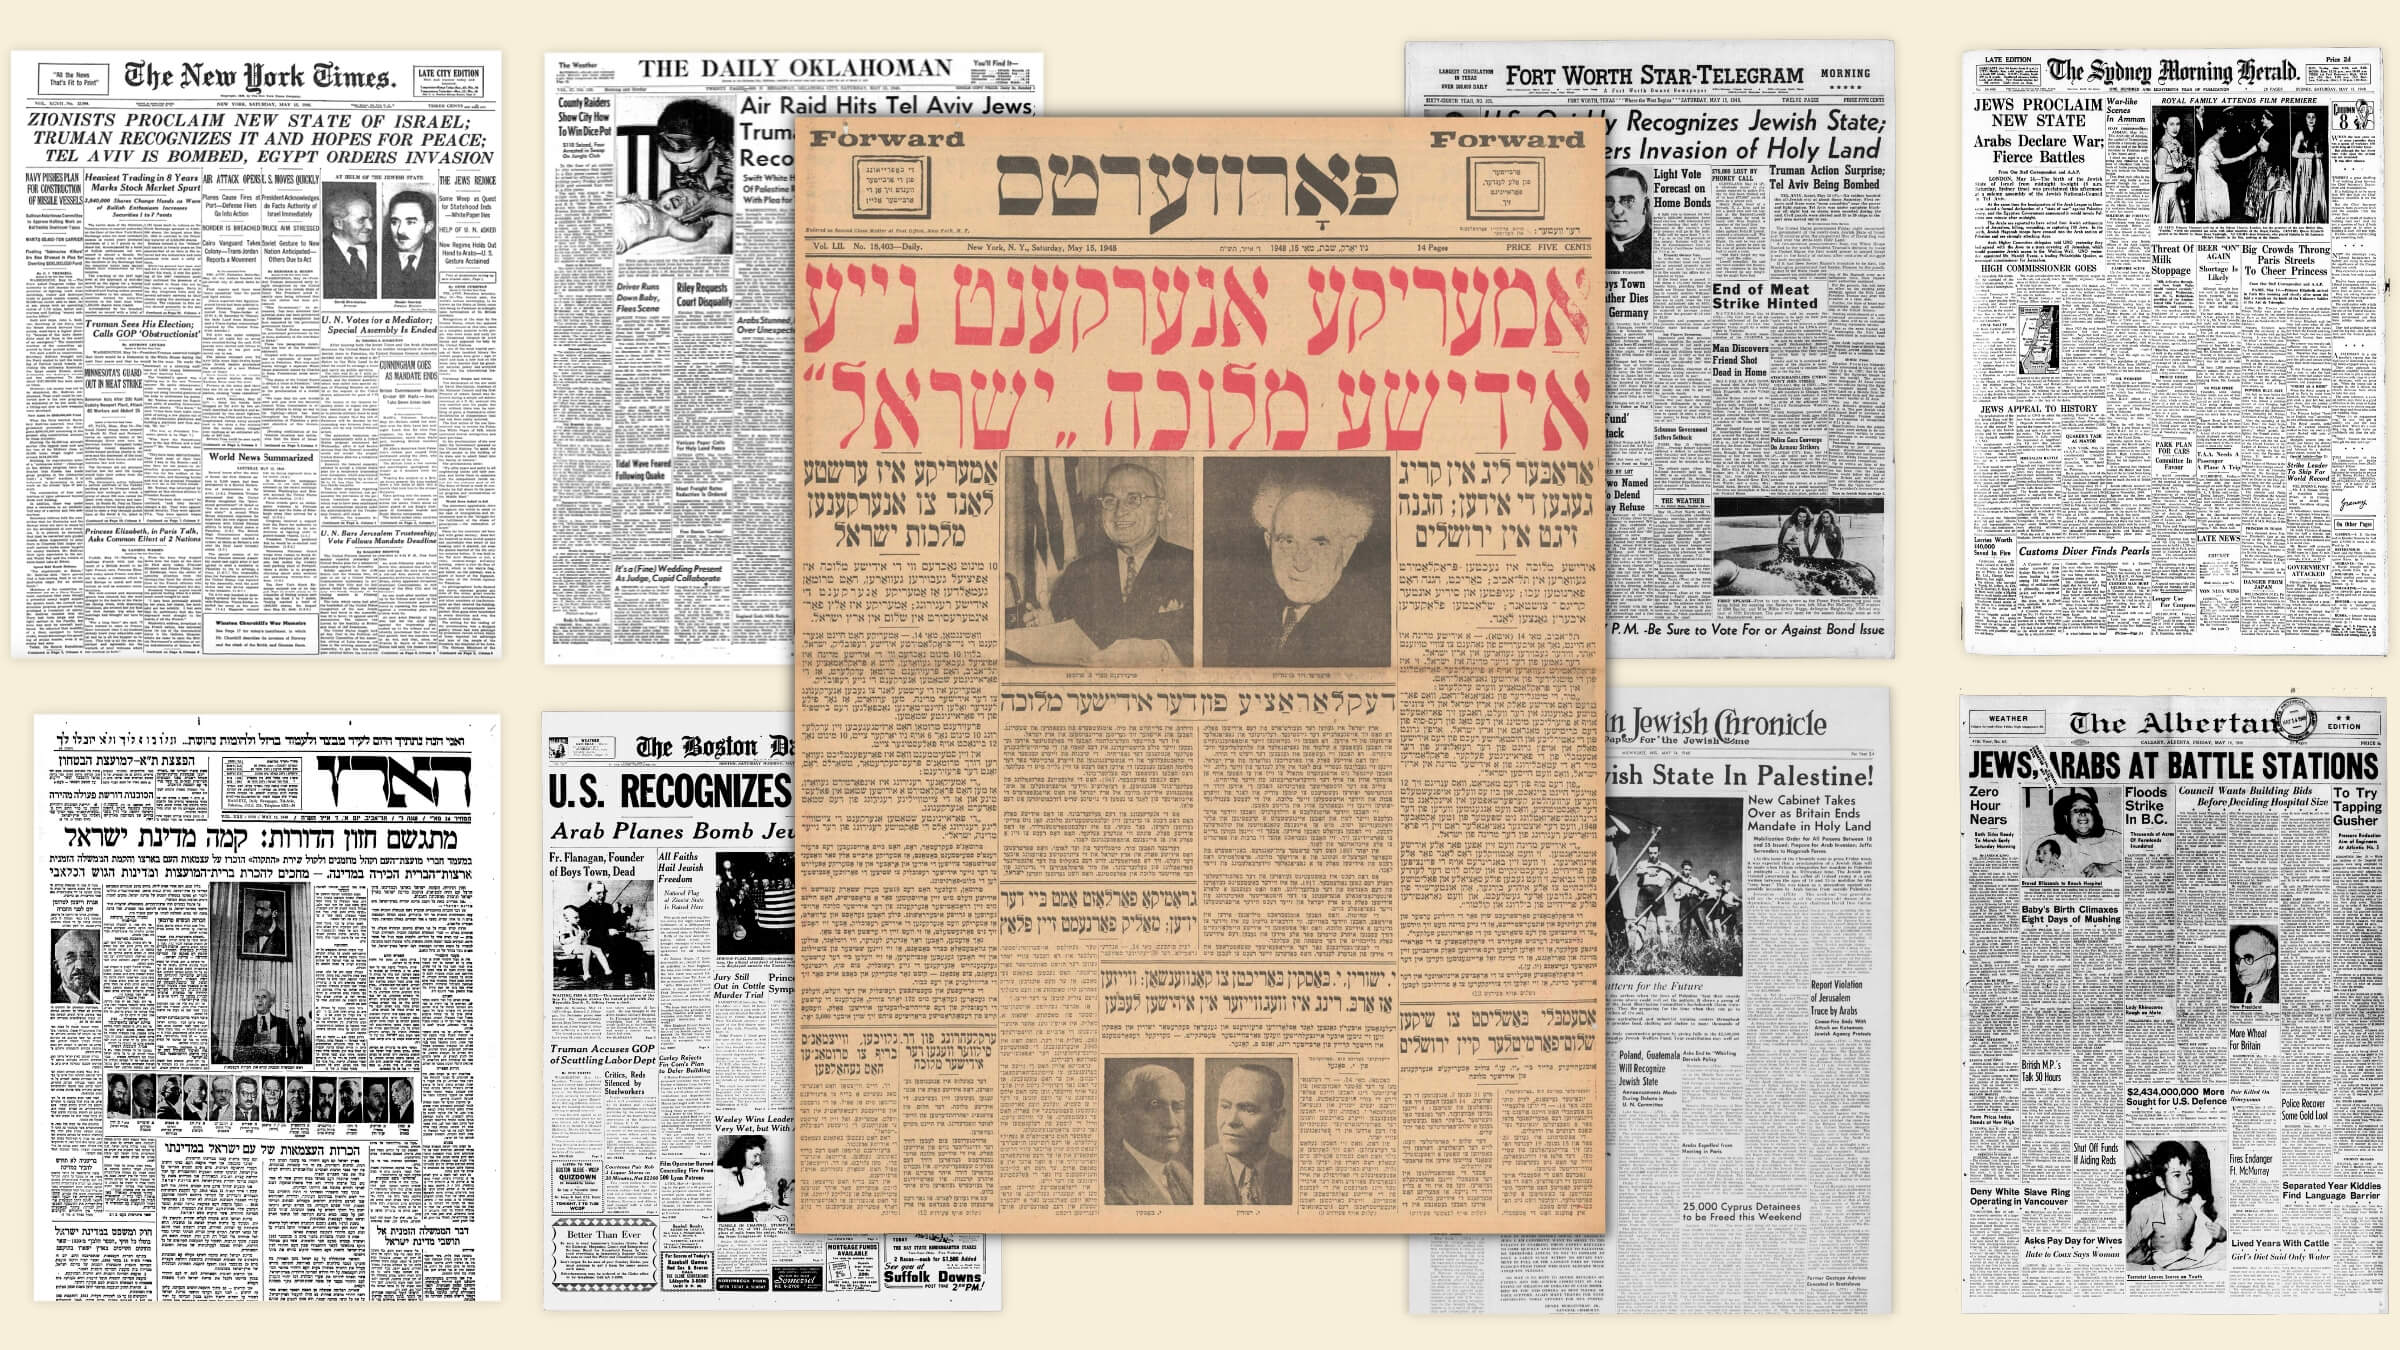 The front pages of newspapers from around the world covering Israel's declaration of independence on May 14, 1948.